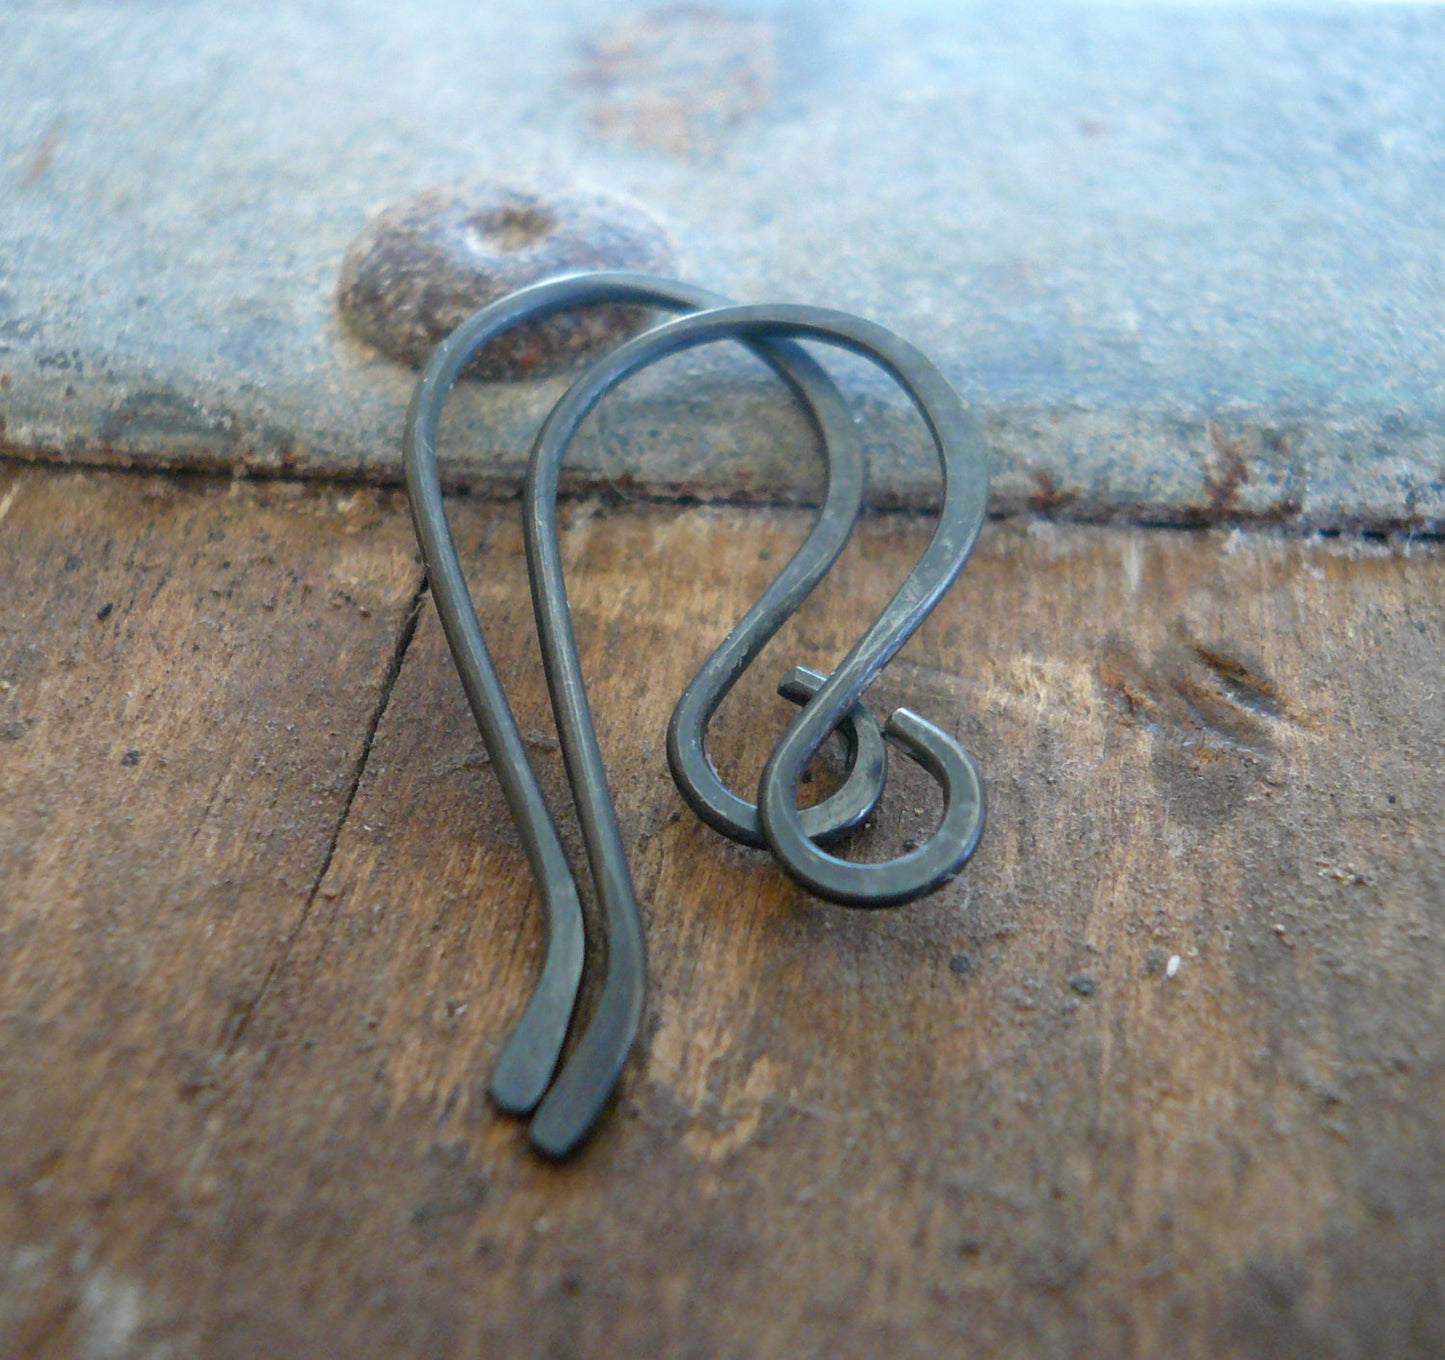 Dandy Sterling Silver Earwires - Handmade. Handforged. Heavily Oxidized. Made to Order